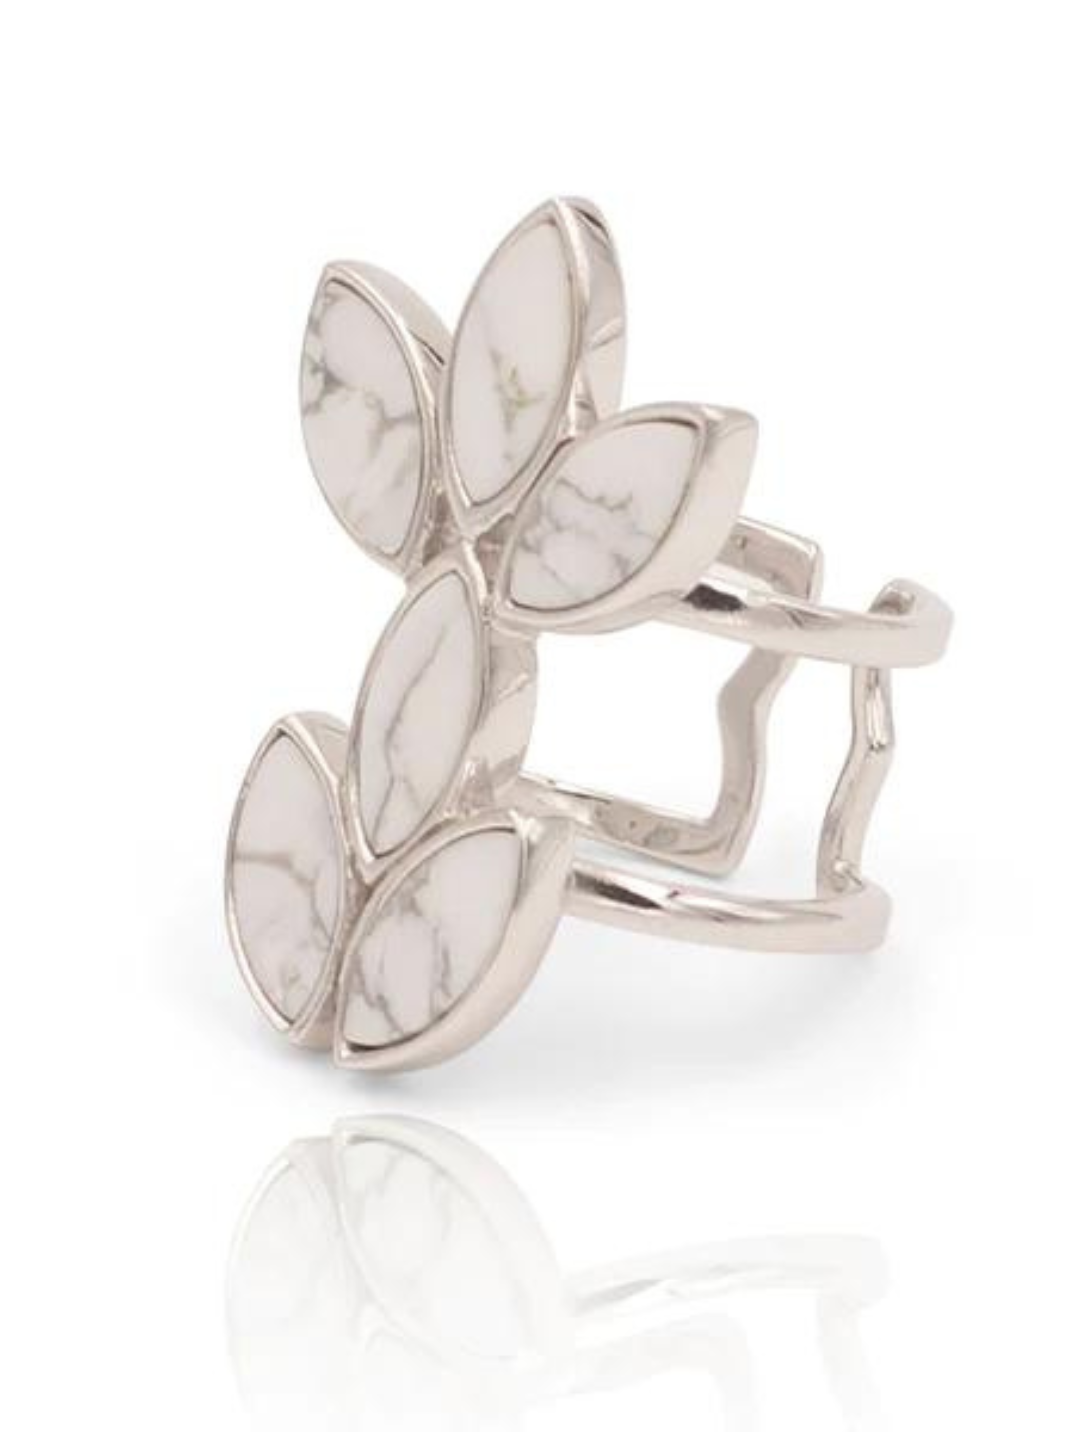 Sterling silver floral escape ring inlaid with hand cut magnesite. You will love the grey marble affect of this semi precious stone.  Details: Our cocktail rings will help enhance any outfit and remind you of your unique and natural beauty.